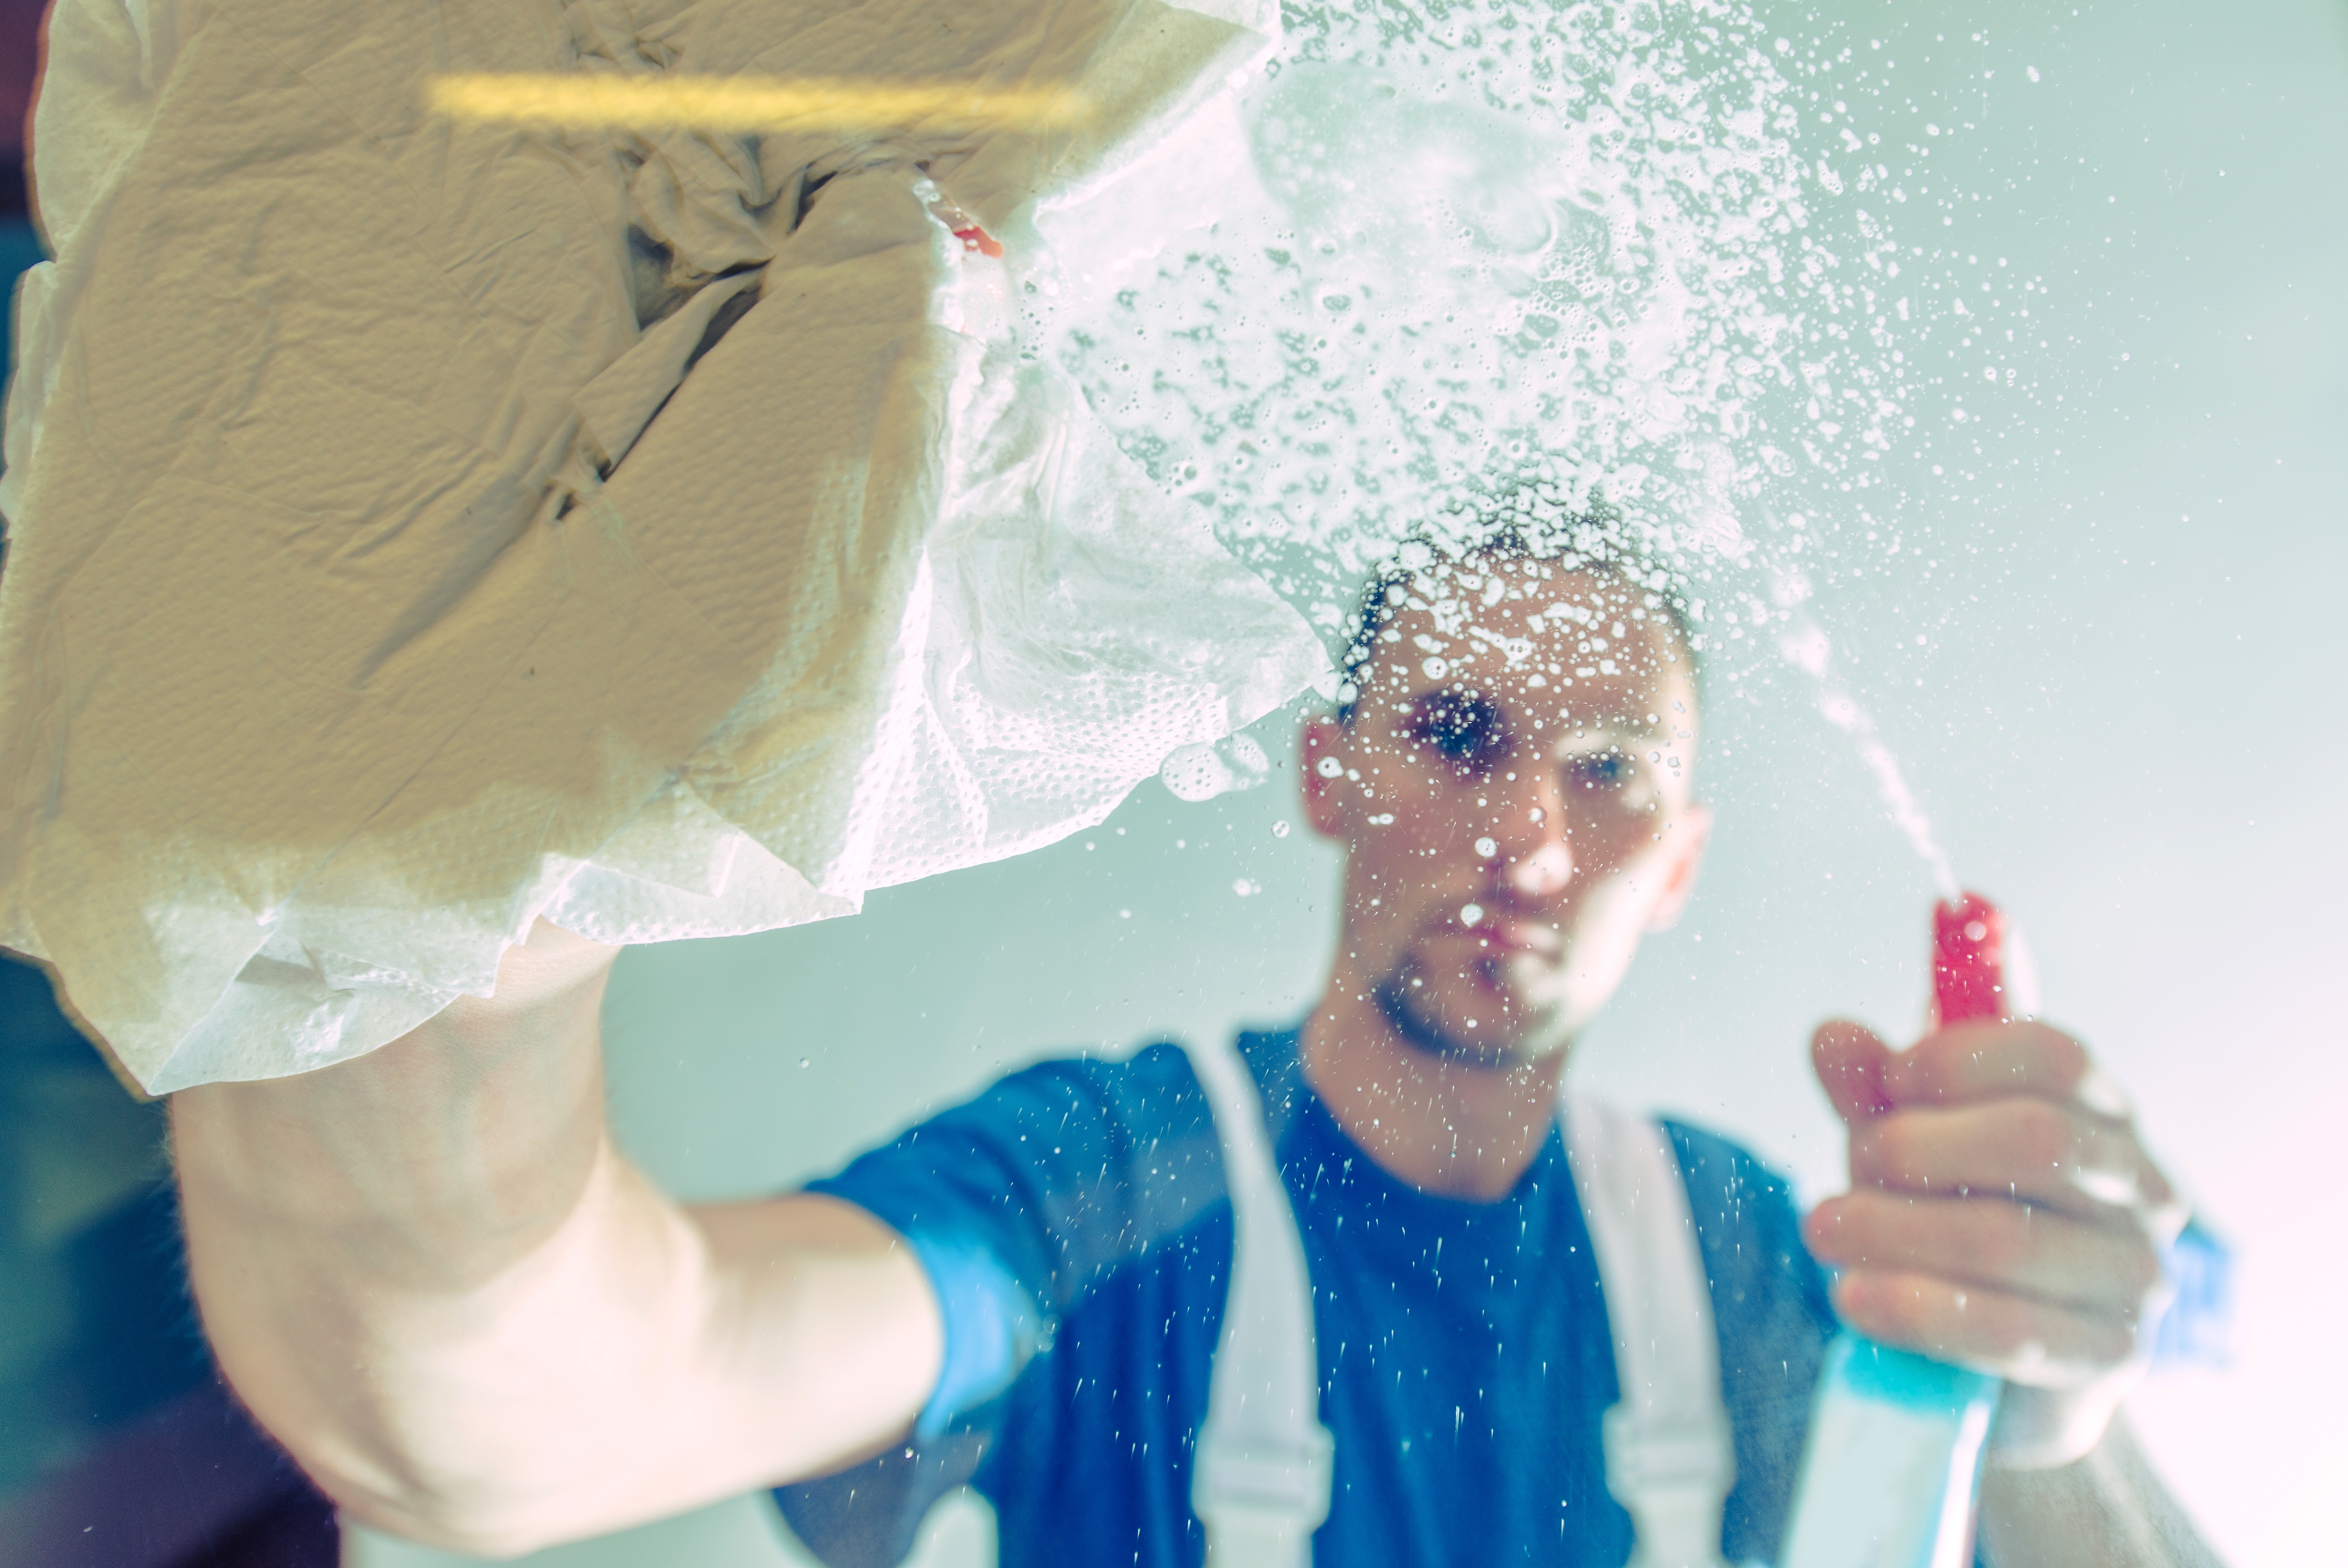 Janitorial Services vs. Commercial Cleaning Services, Which is Better for  you?